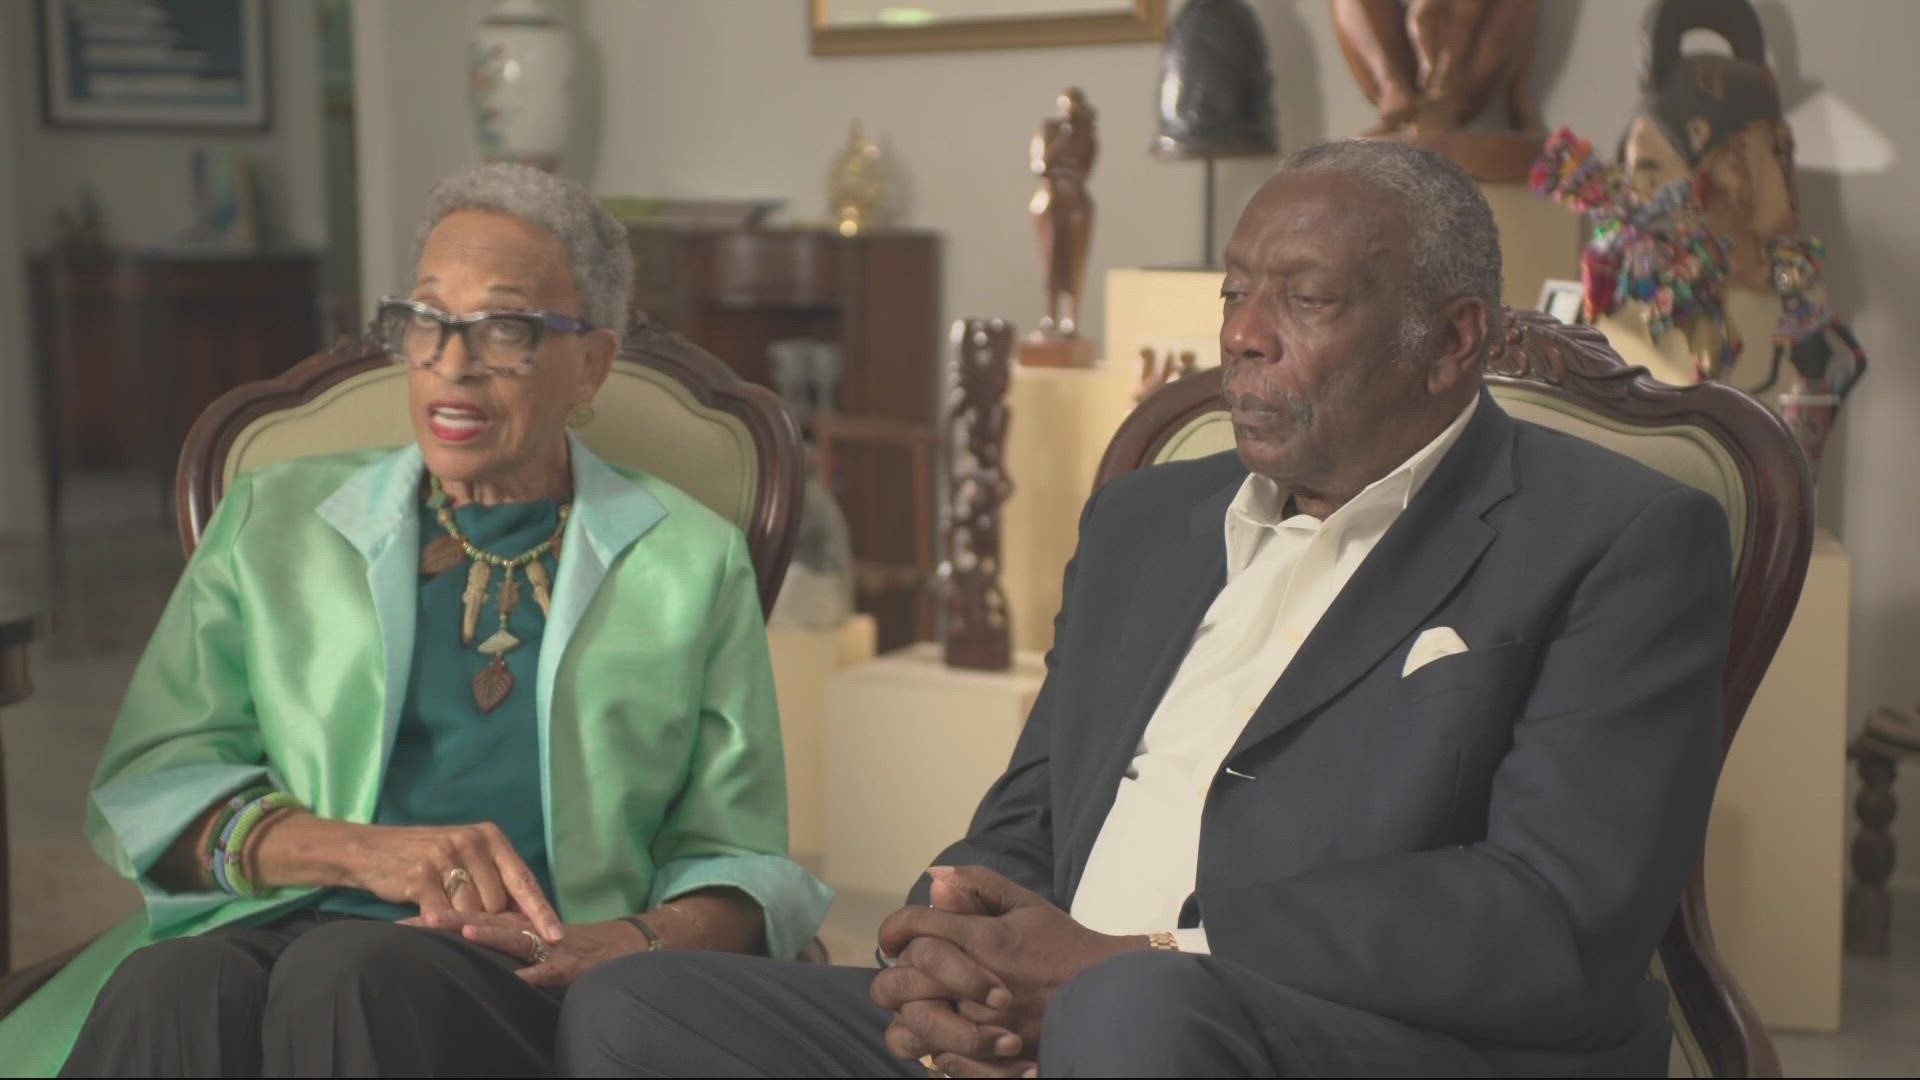 He grew up in Jacksonville's New Town area. She belonged to the African-American upper class. They would both go on to become history makers and icons.